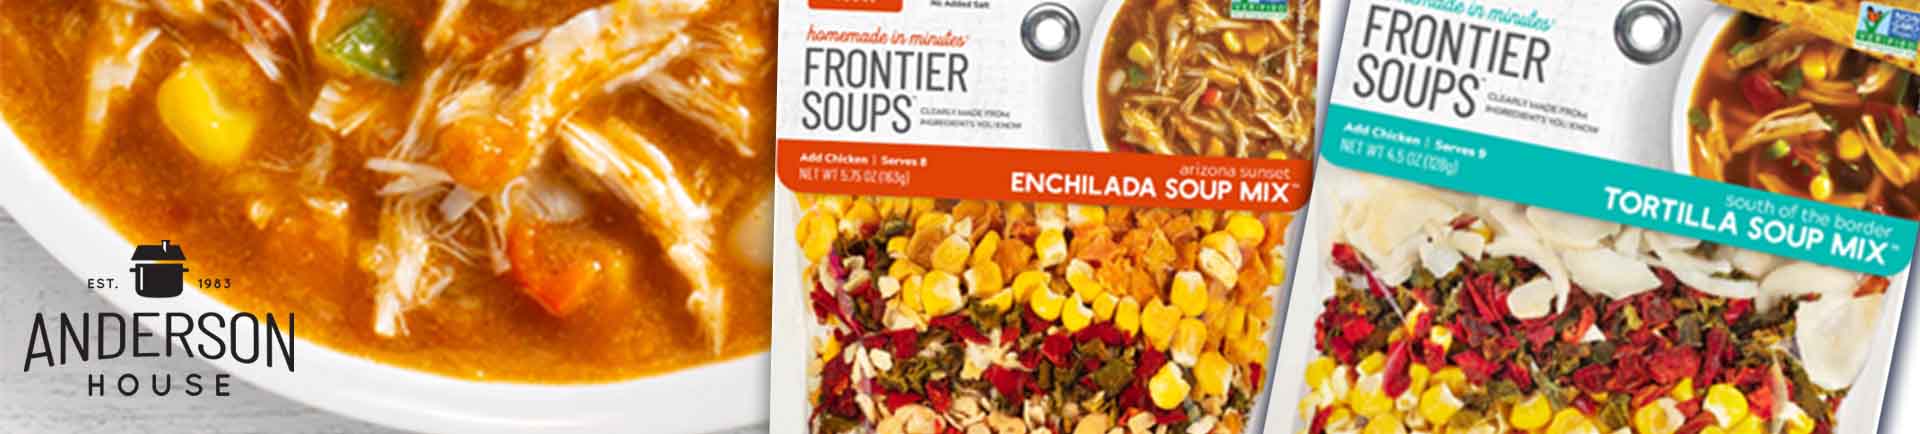 Frontier Soups | Anderson House Banner